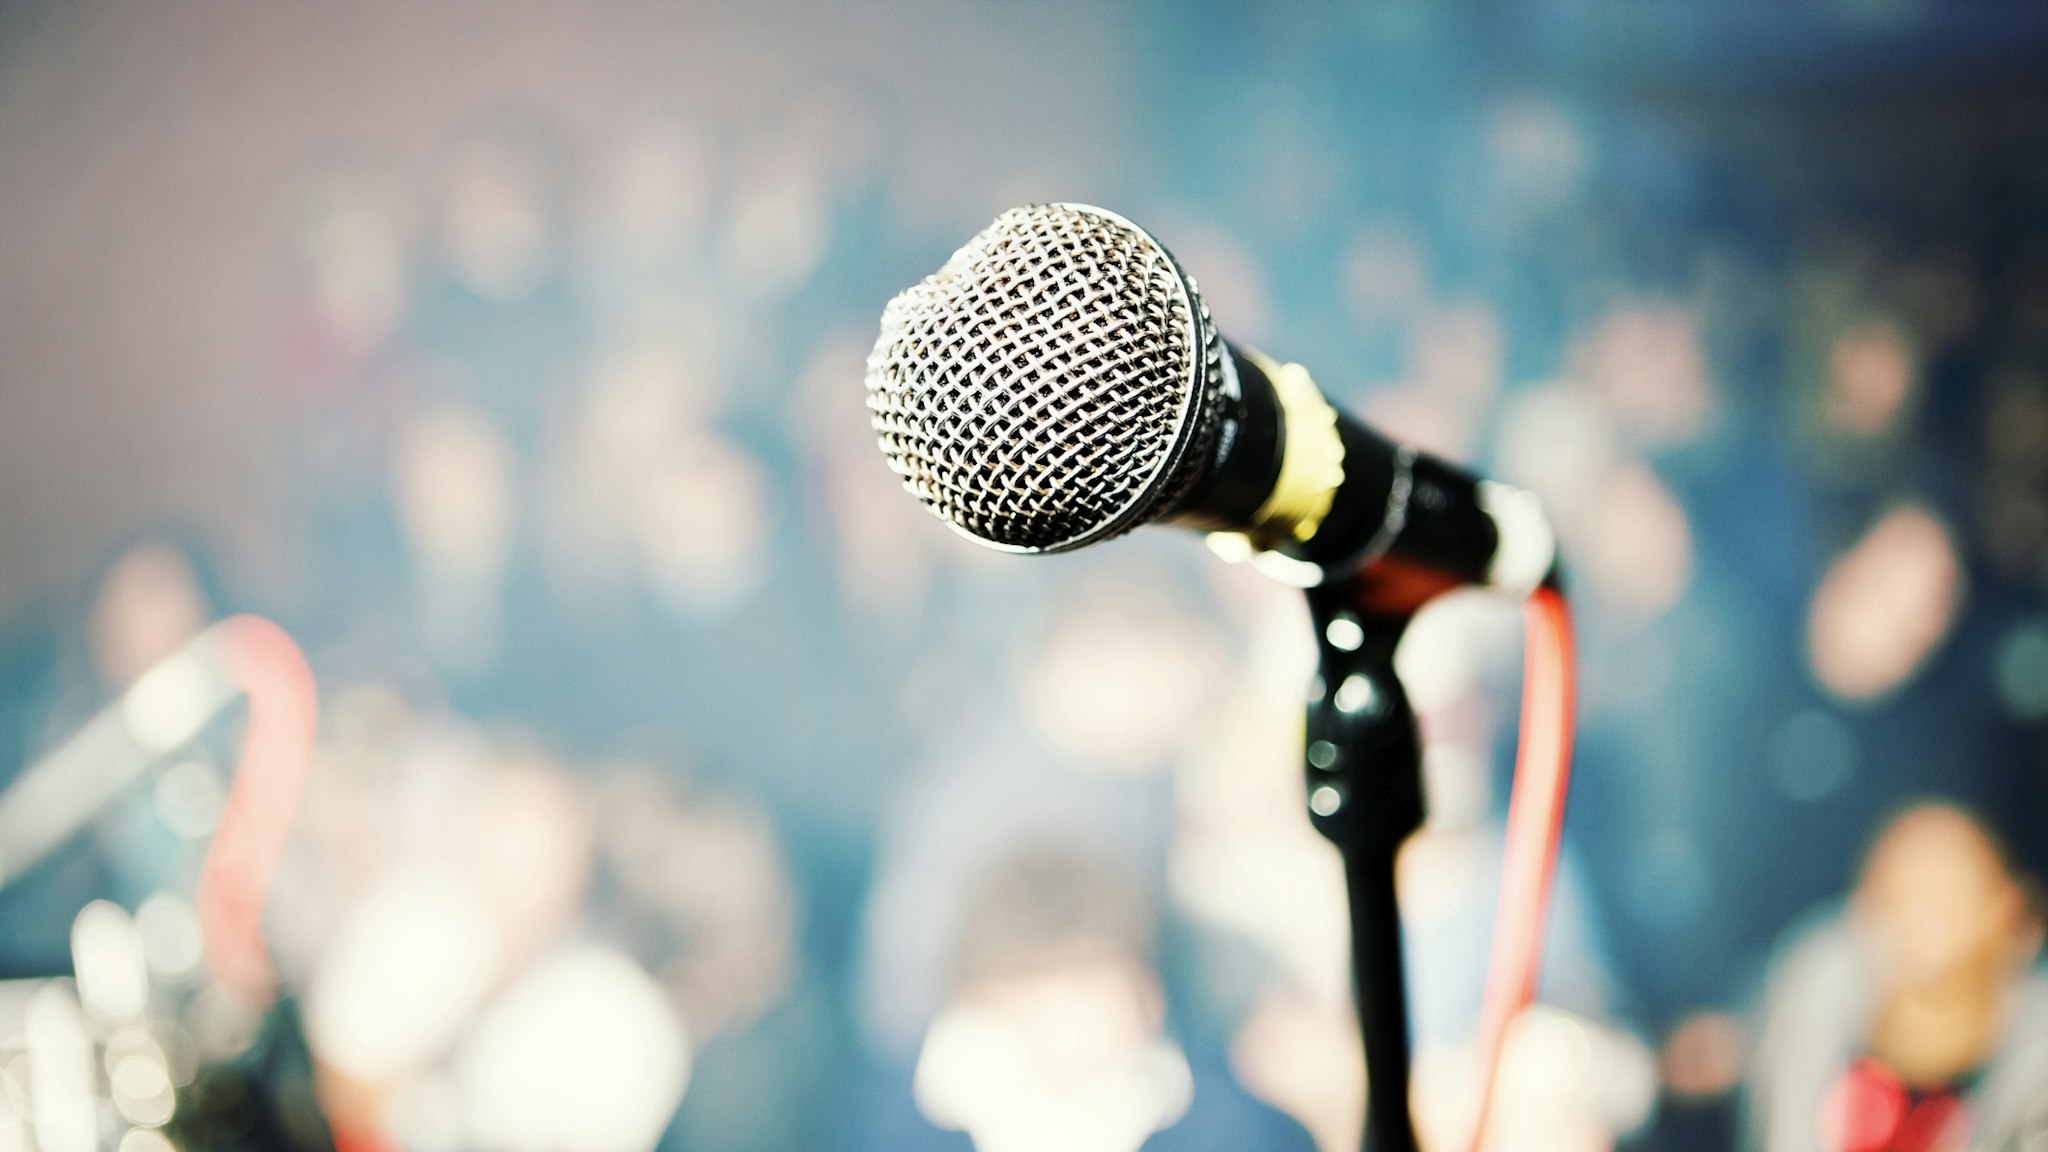 Performer's point of view over microphone into theater audience - stock photo